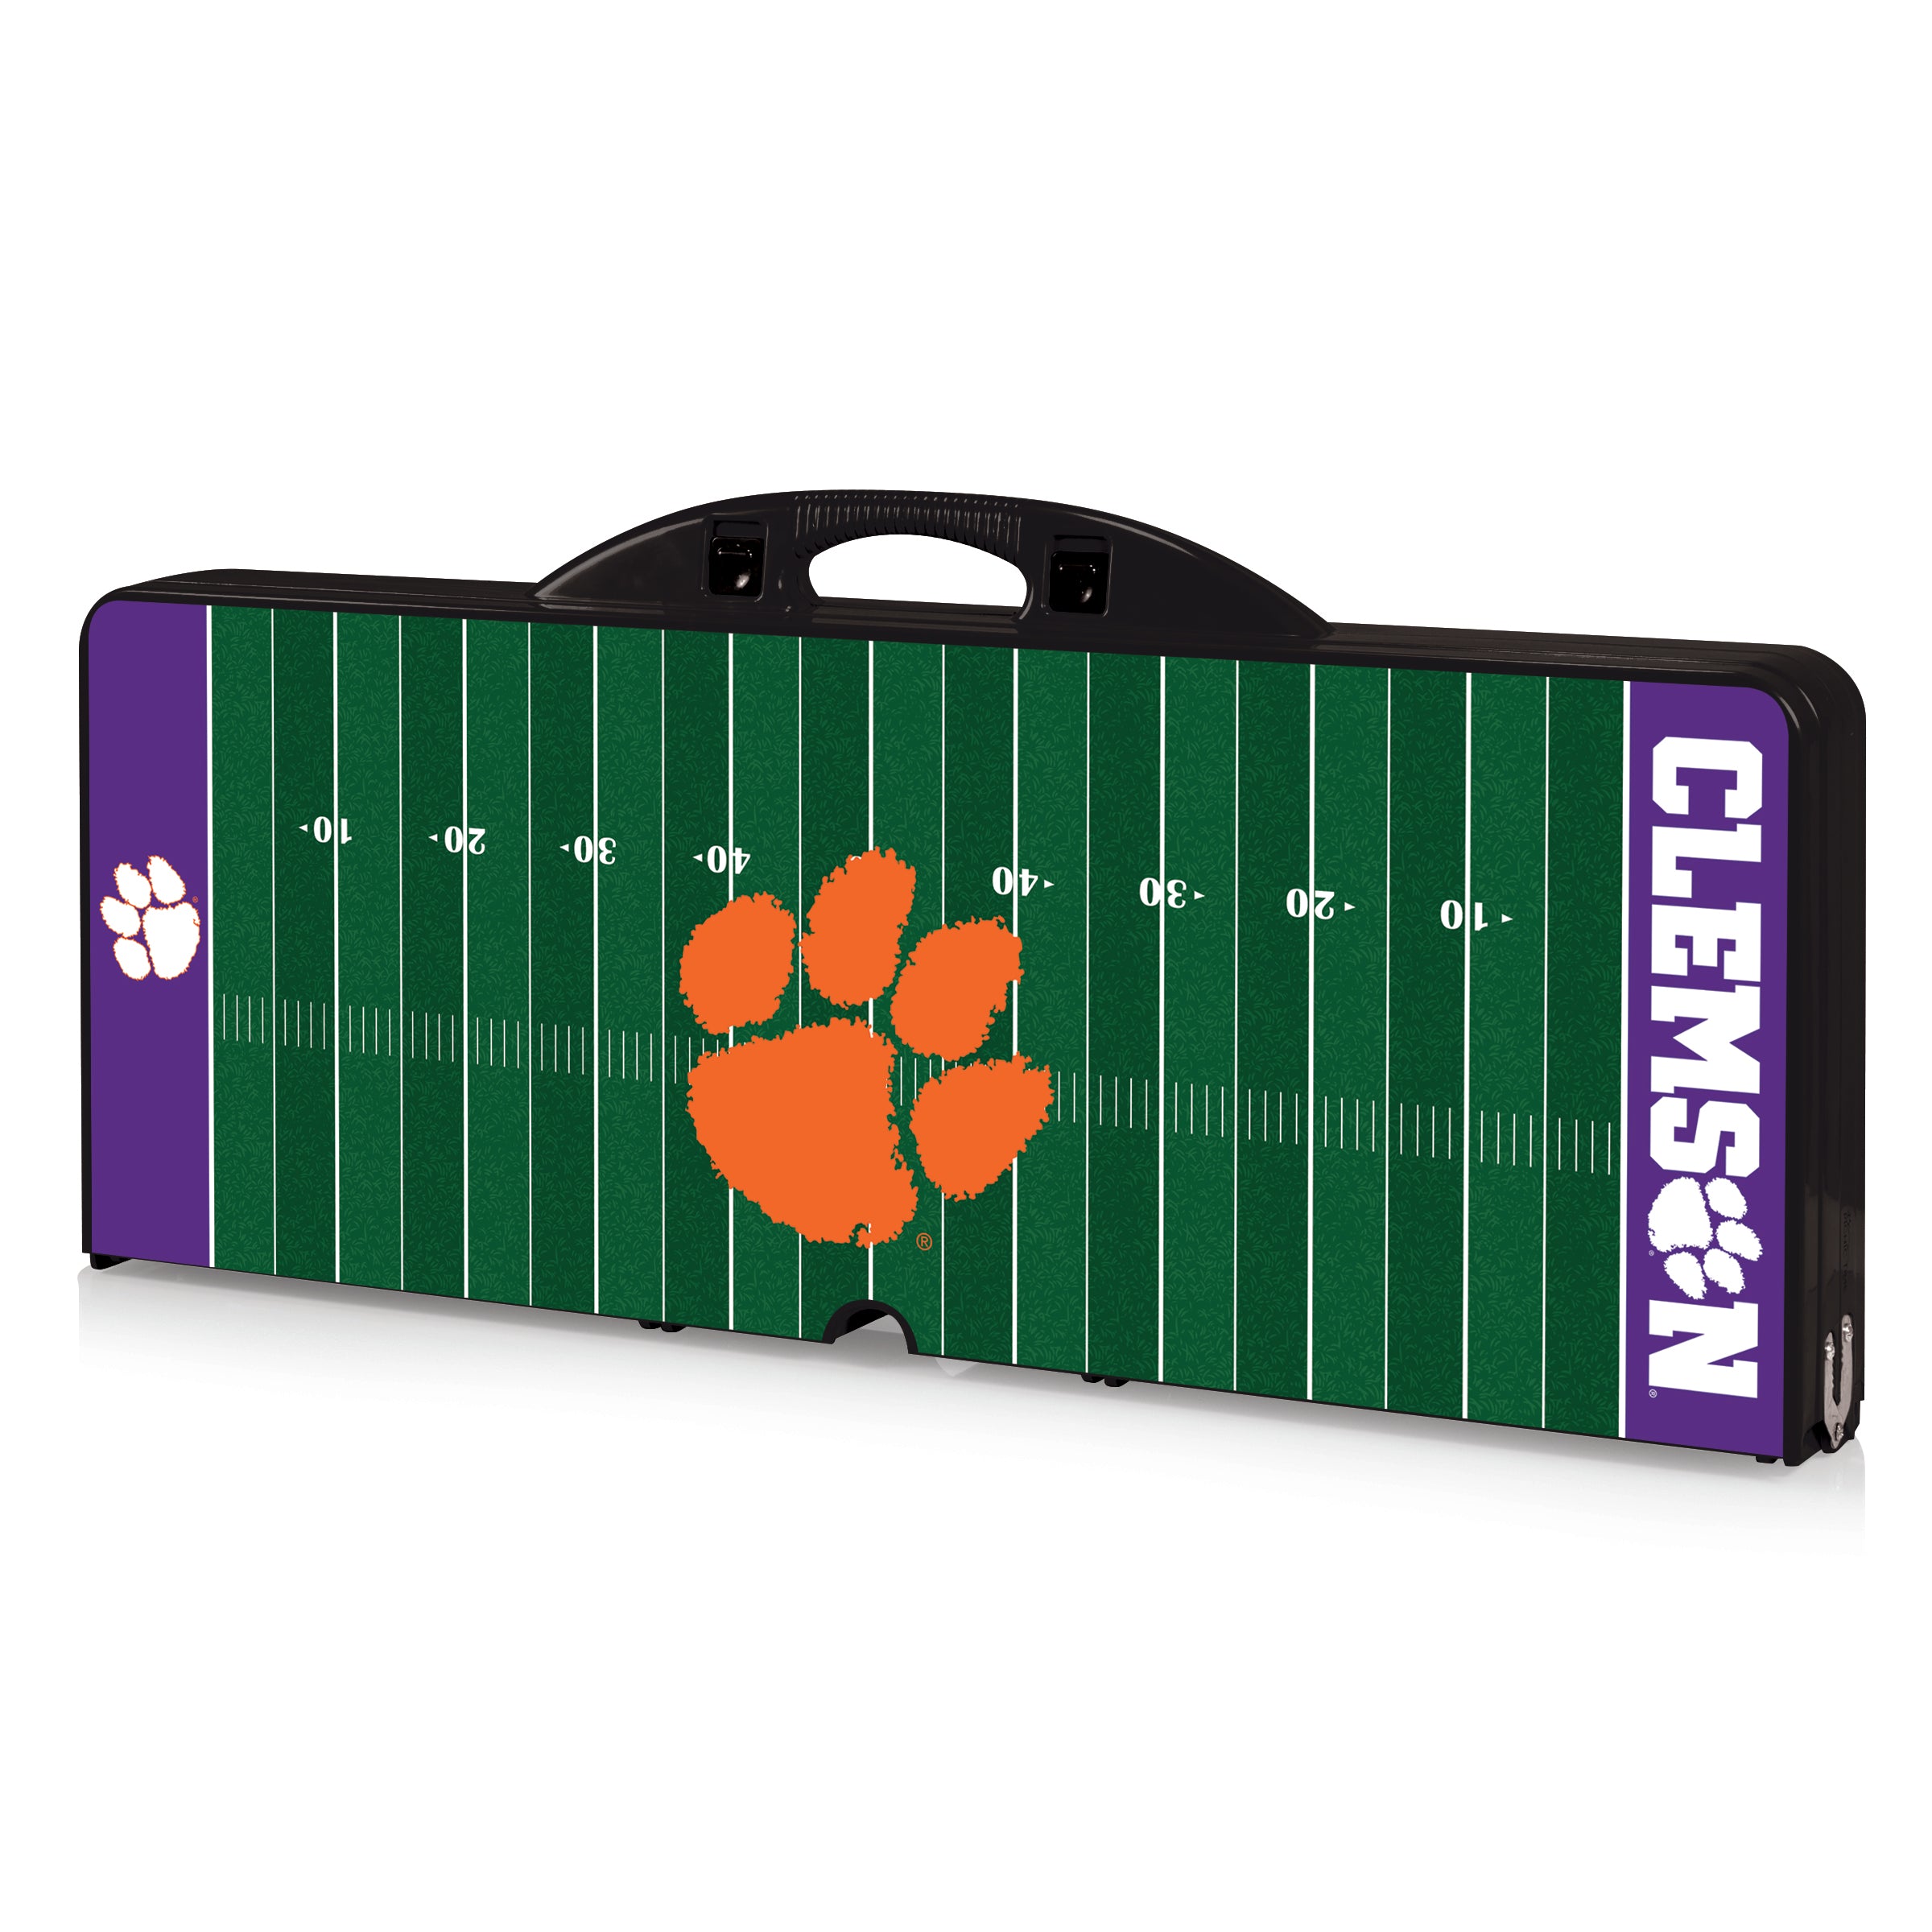 Clemson Tigers Football Field - Picnic Table Portable Folding Table with Seats